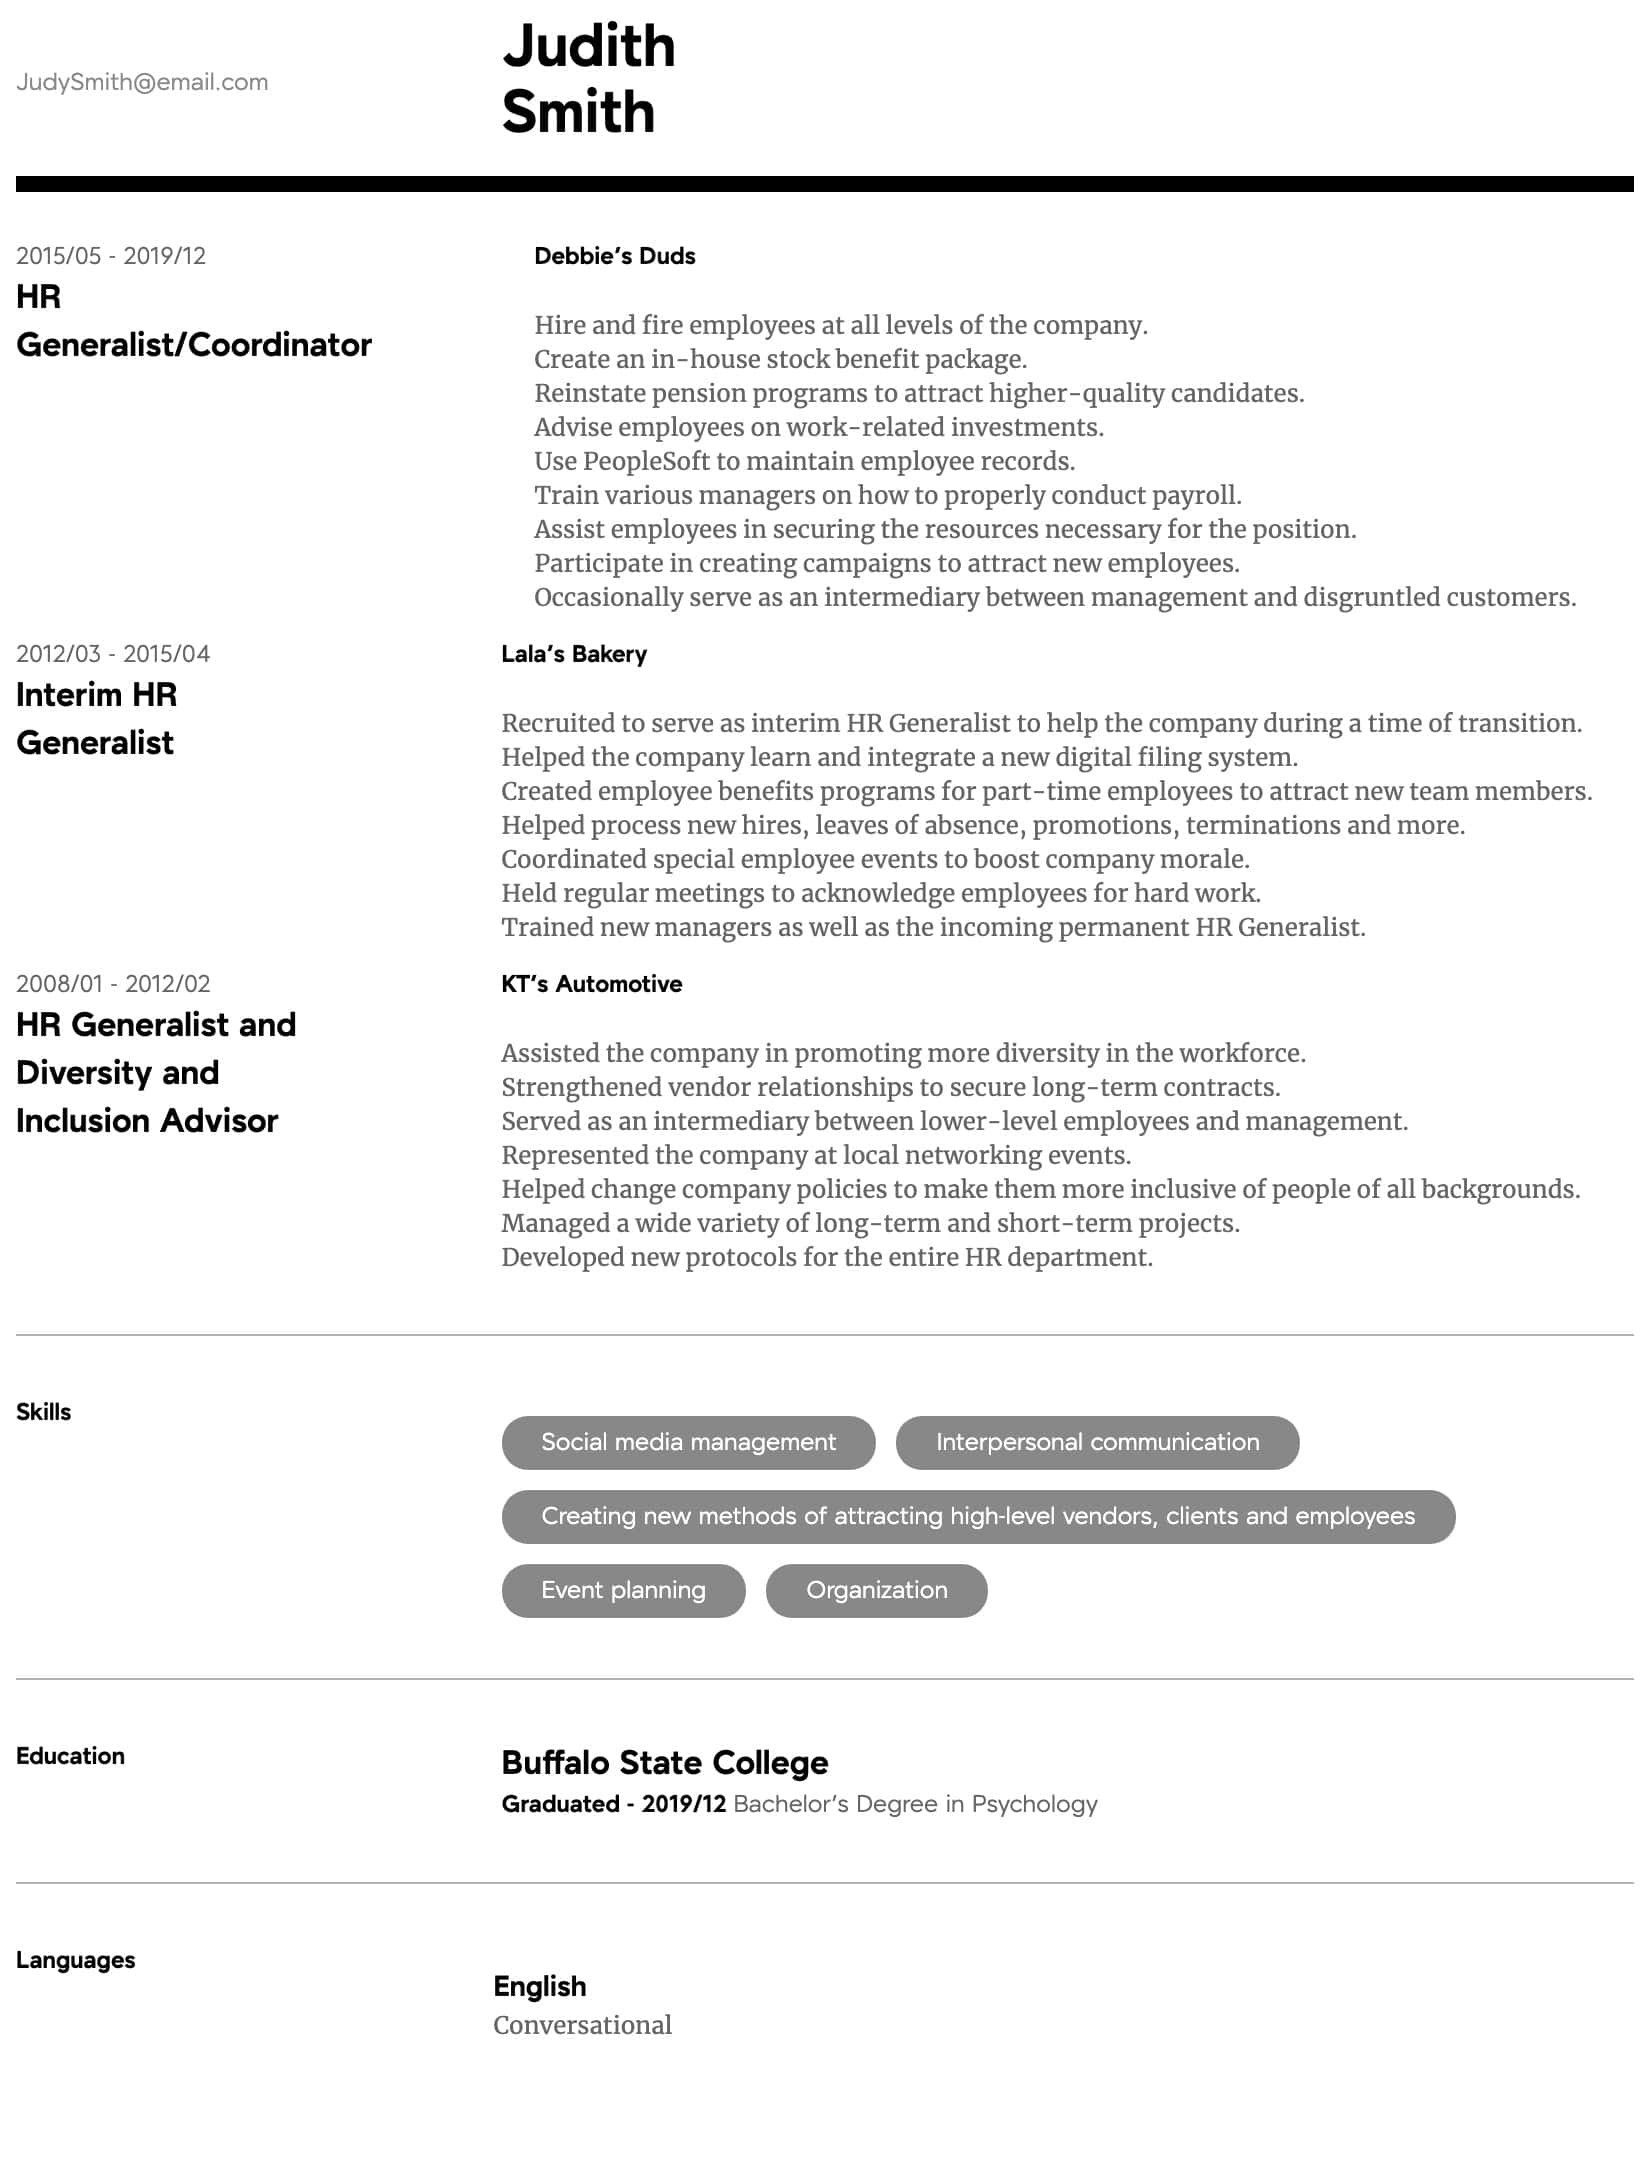 Resume Templates for Human Resources Generalist Hr Generalist Resume Samples All Experience Levels Resume.com …